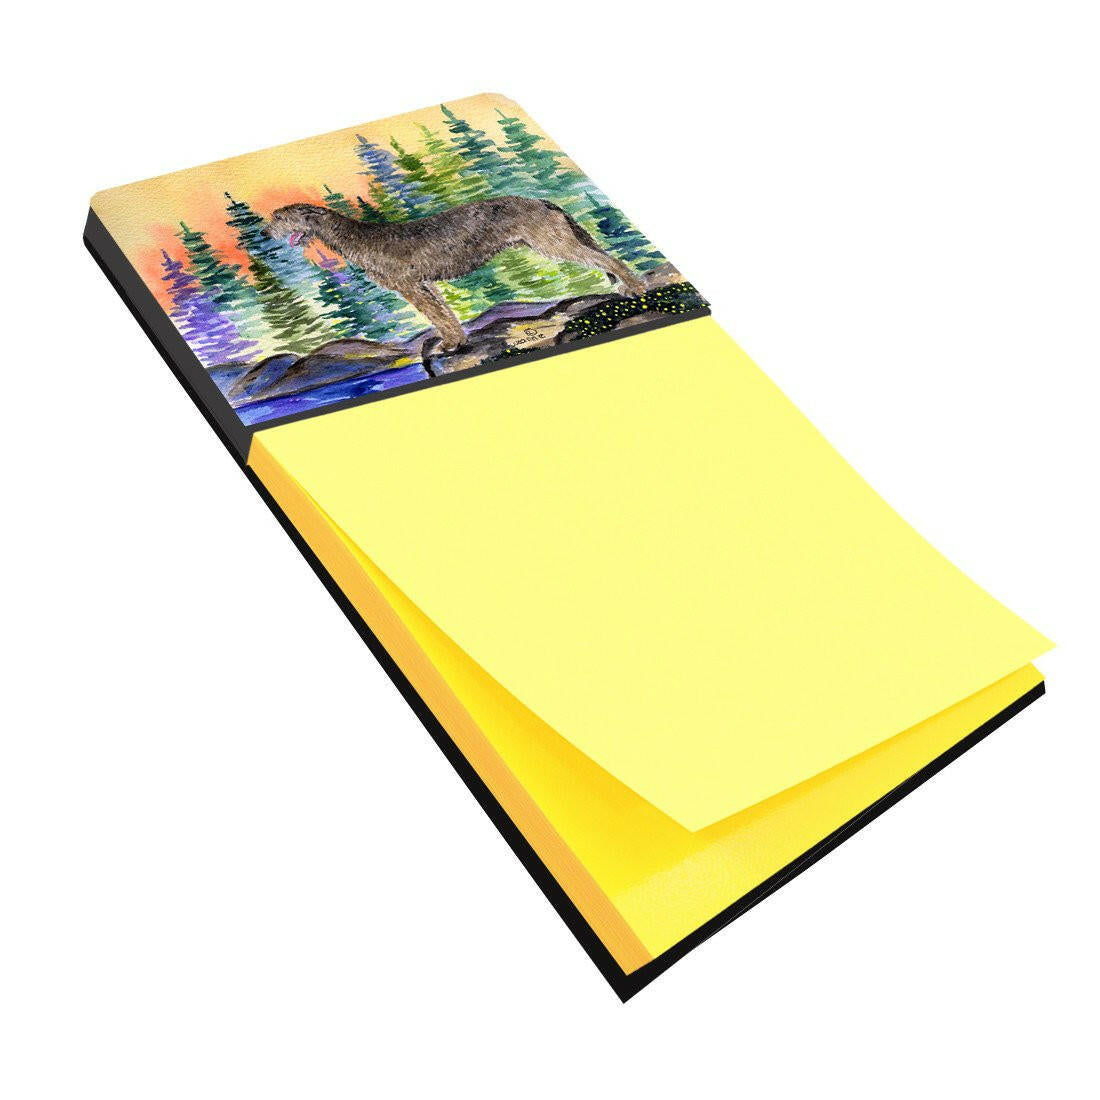 Irish Wolfhound Refiillable Sticky Note Holder or Postit Note Dispenser SS8205SN by Caroline's Treasures